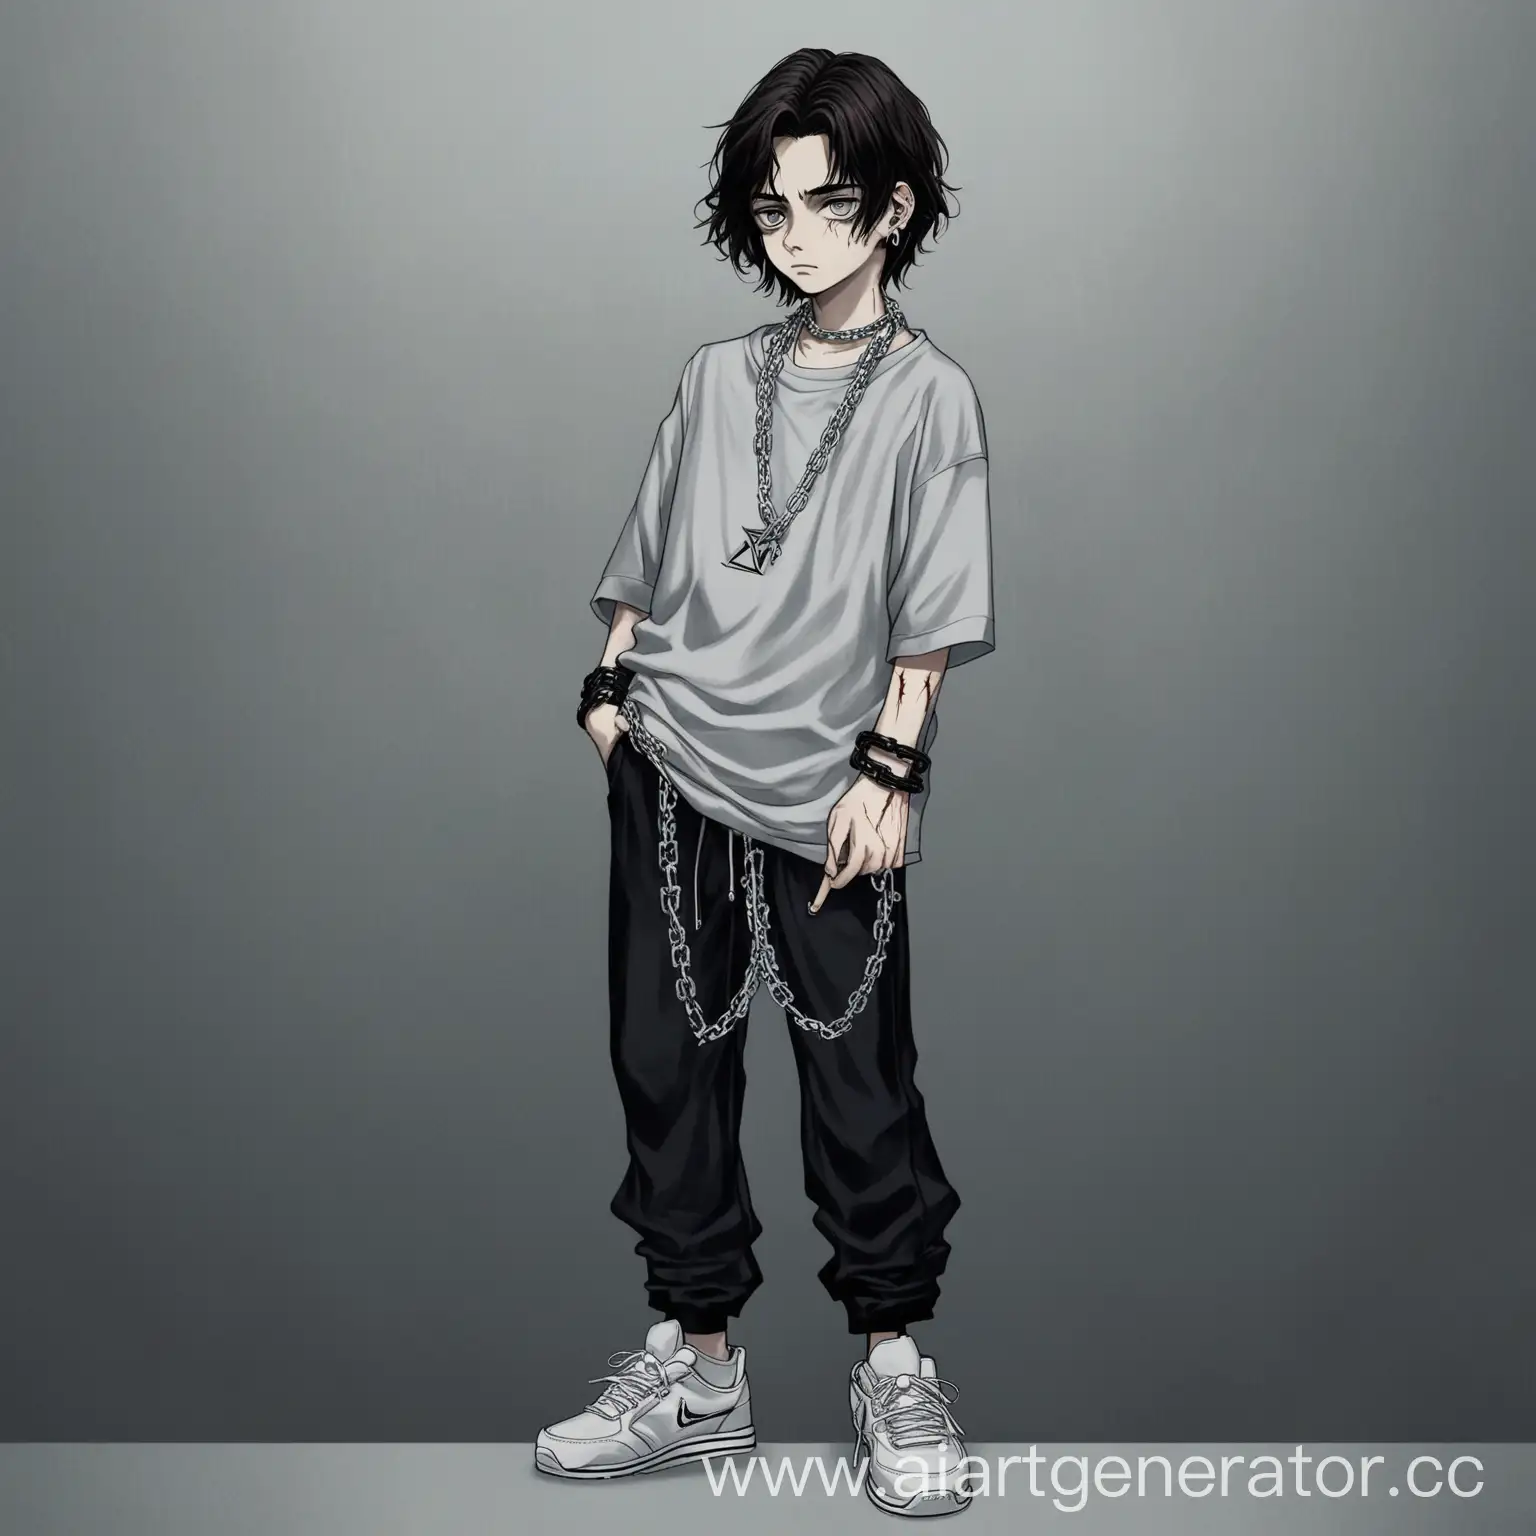 Teenage-Boy-with-Wavy-Hair-in-Casual-Streetwear-and-Accessories